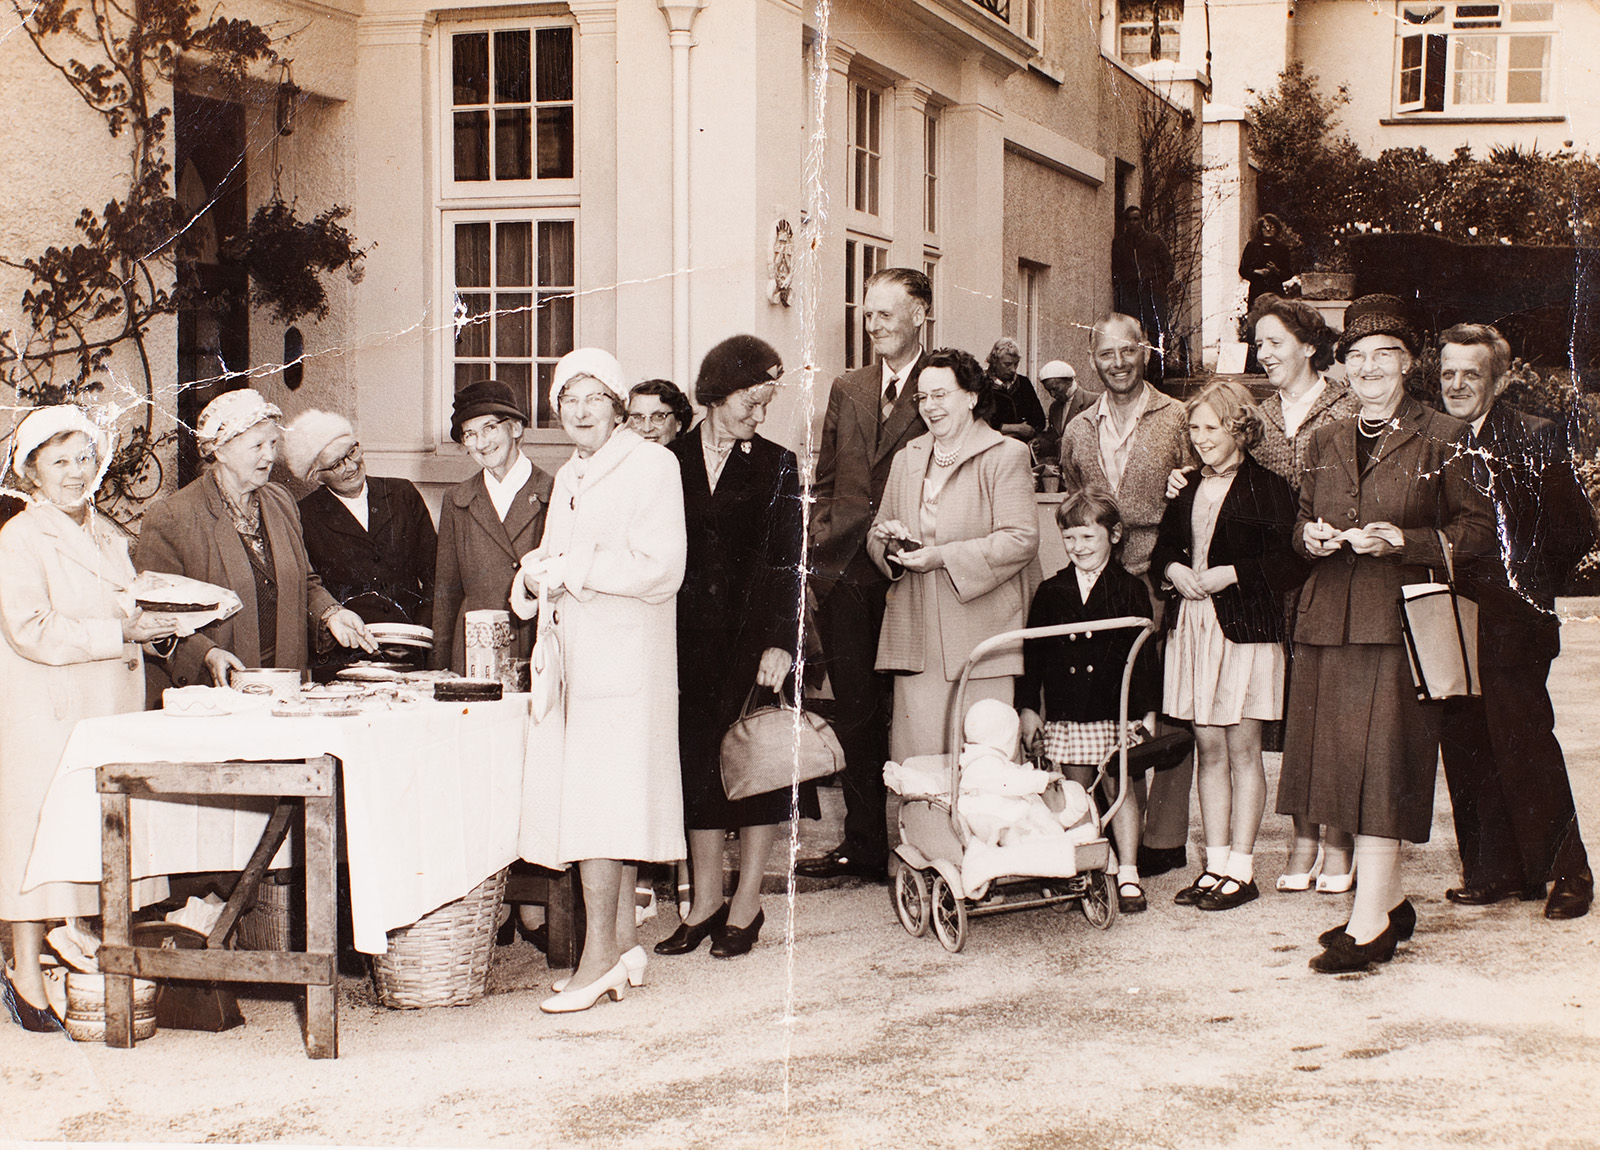 Photograph of Huntley Fete 1950s